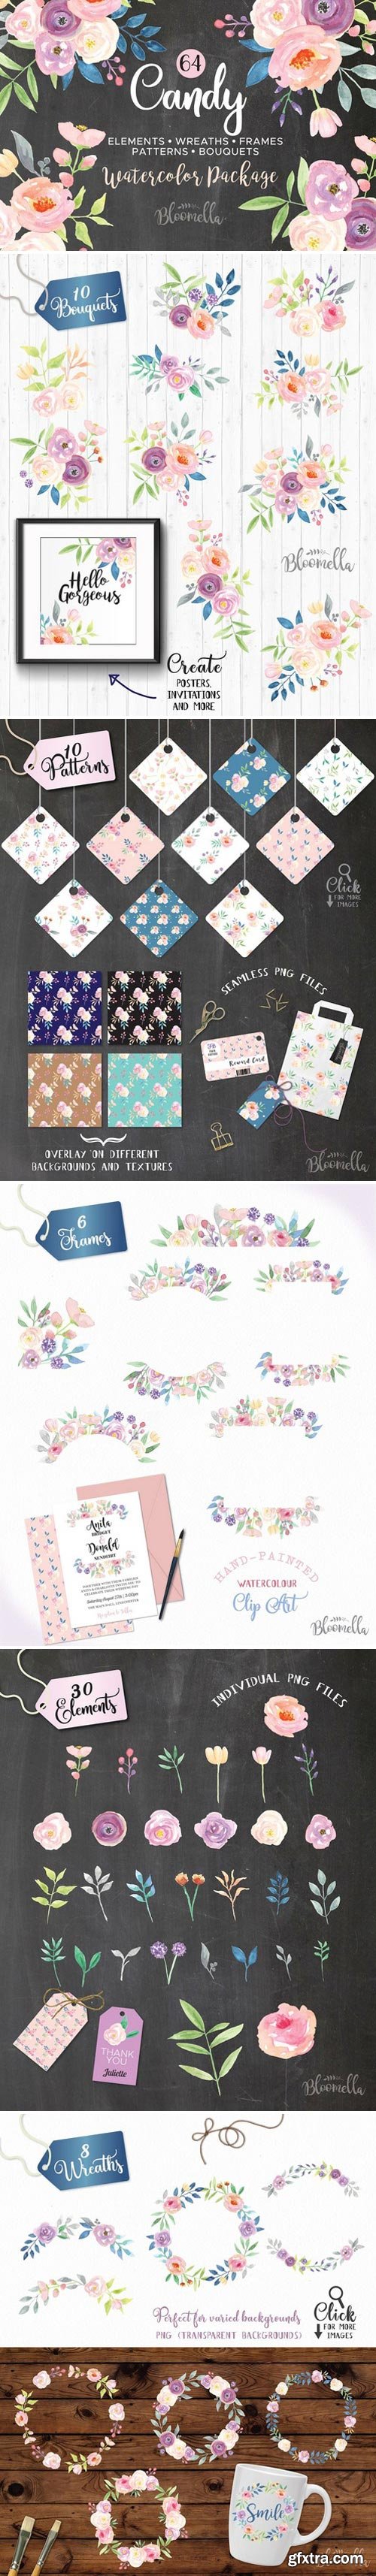 CM - Candy Pastel Watercolor Flower Pack 2227773